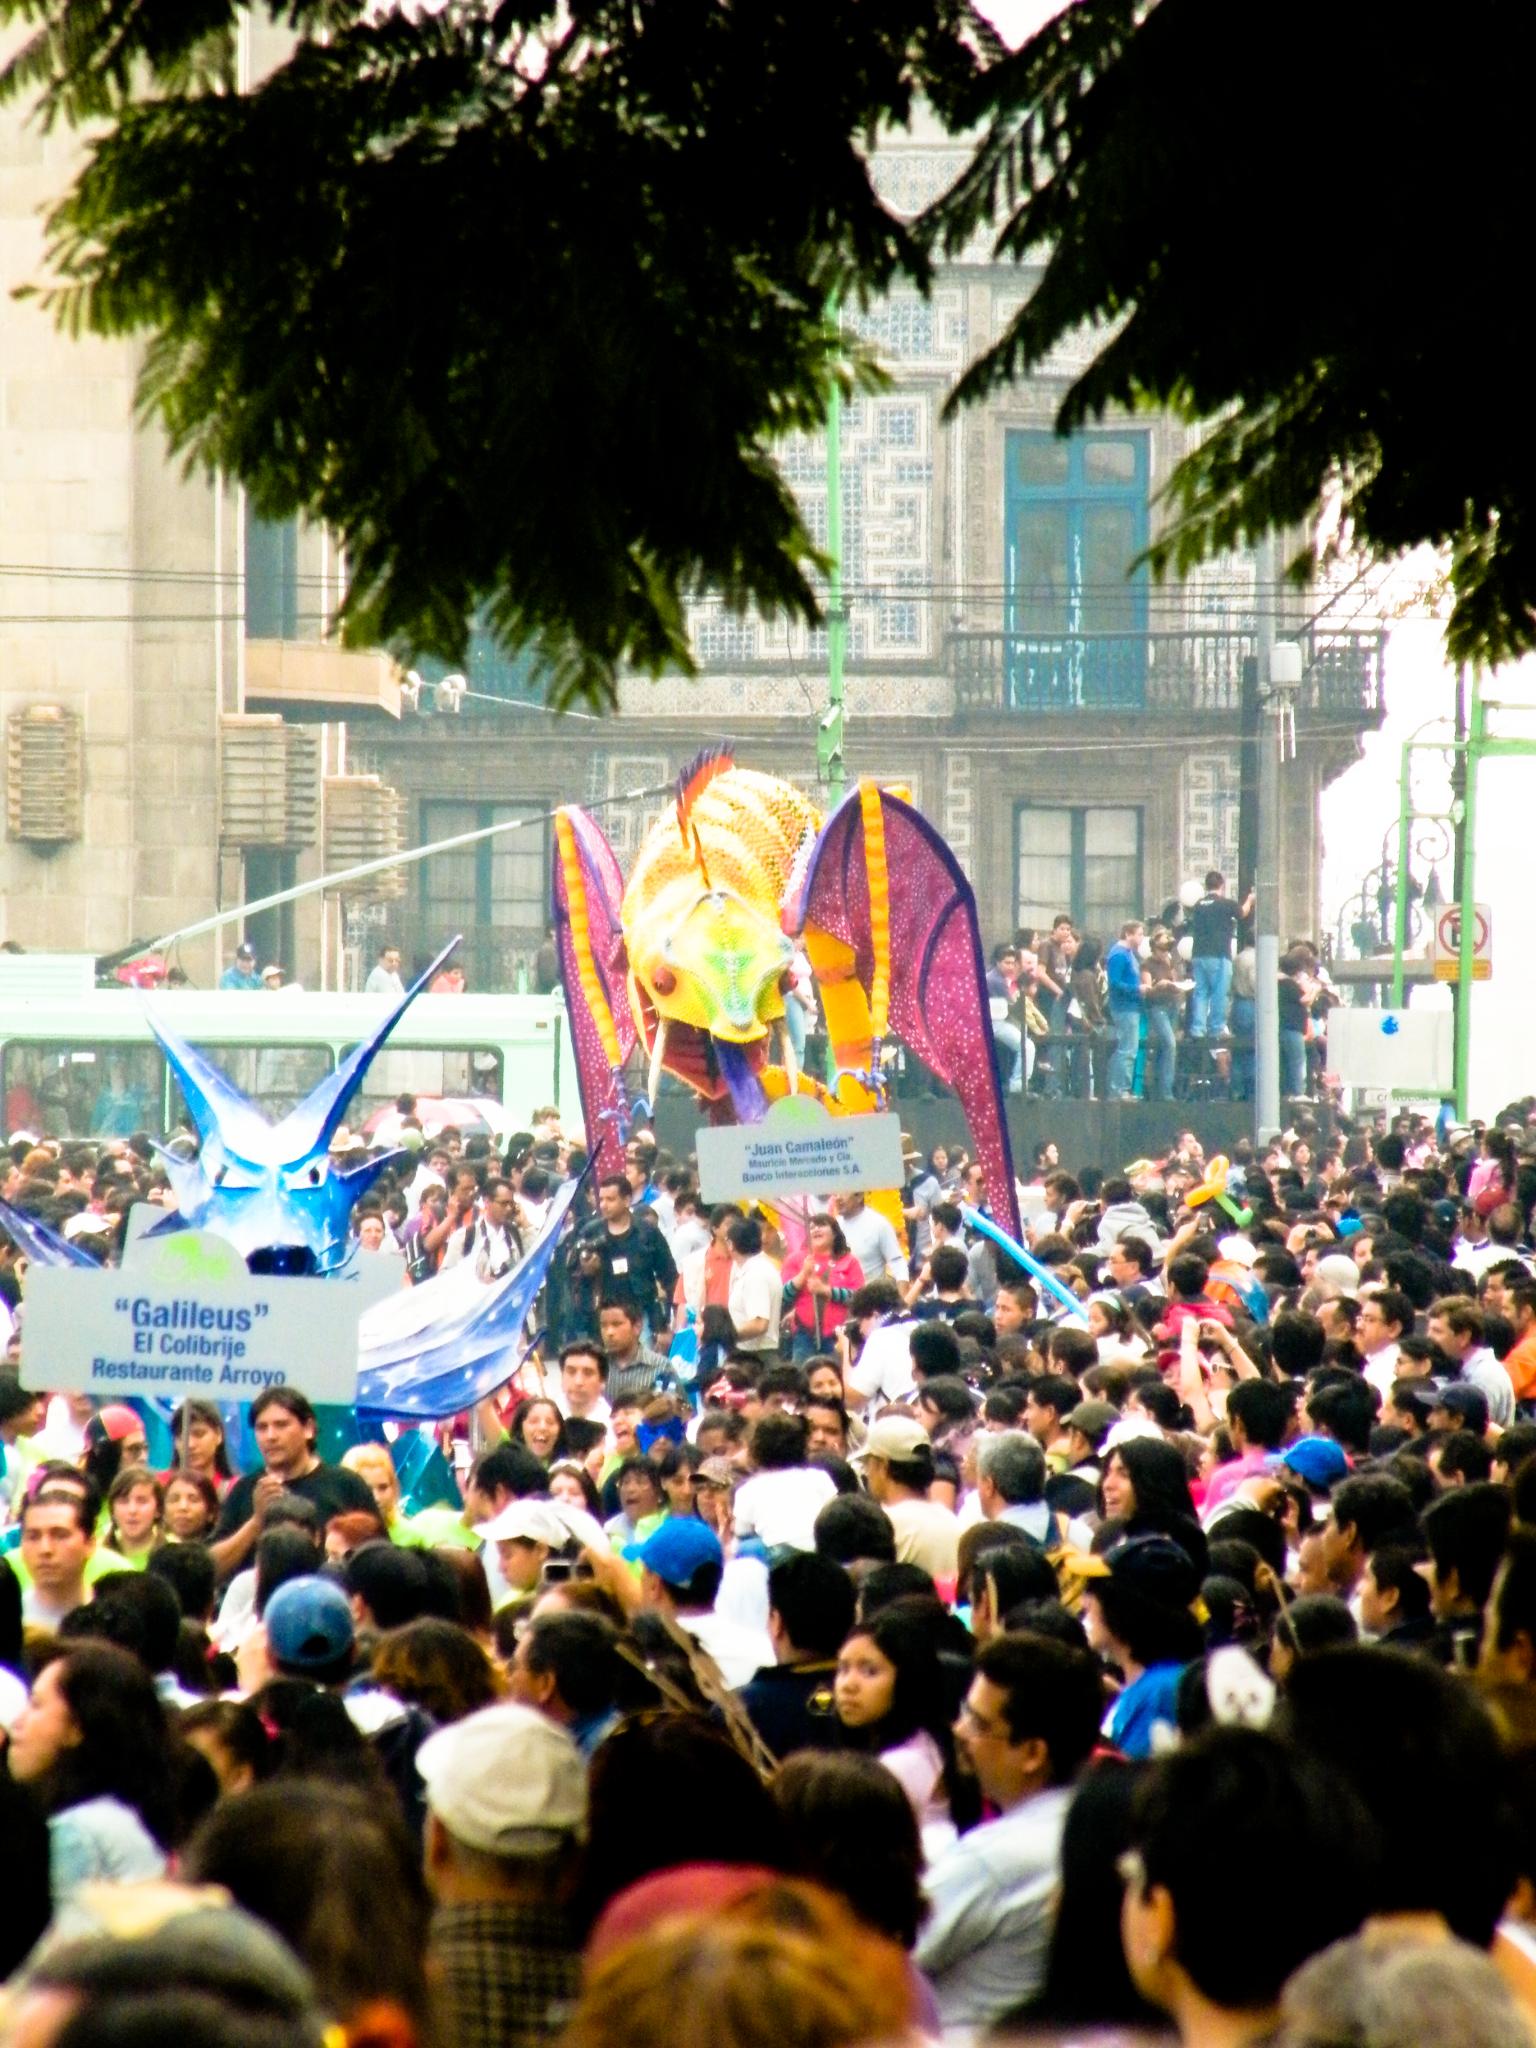 crowd of people on street with float in air